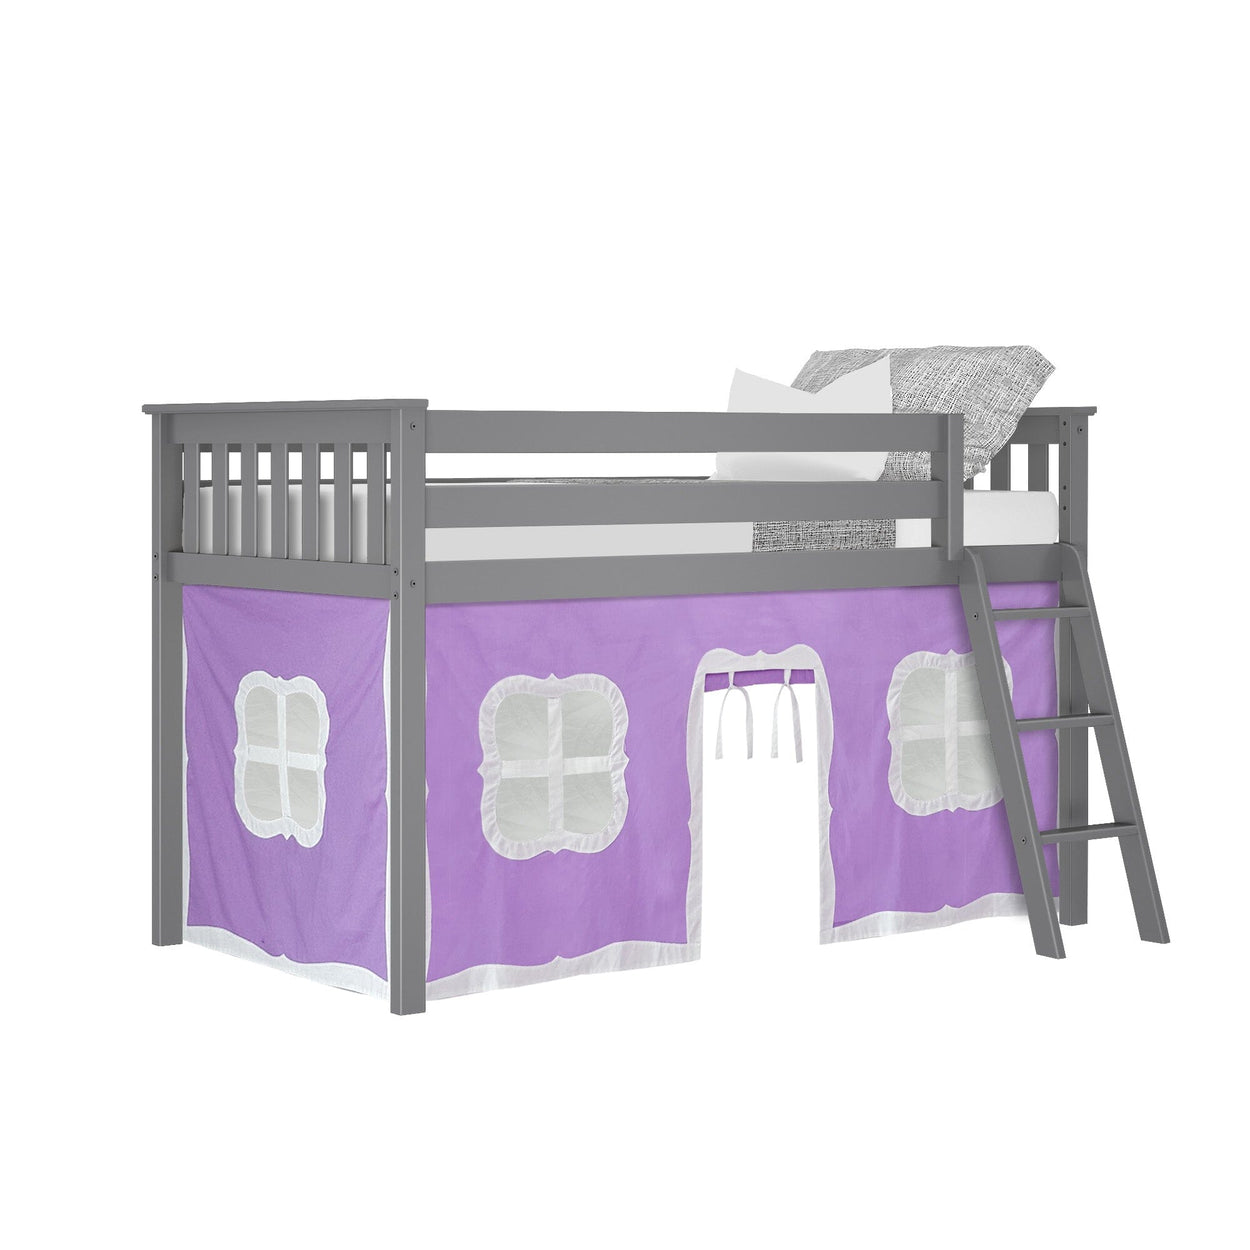 180212121061 : Loft Beds Twin-Size Low Loft With Curtain, Grey + Purple Curtain